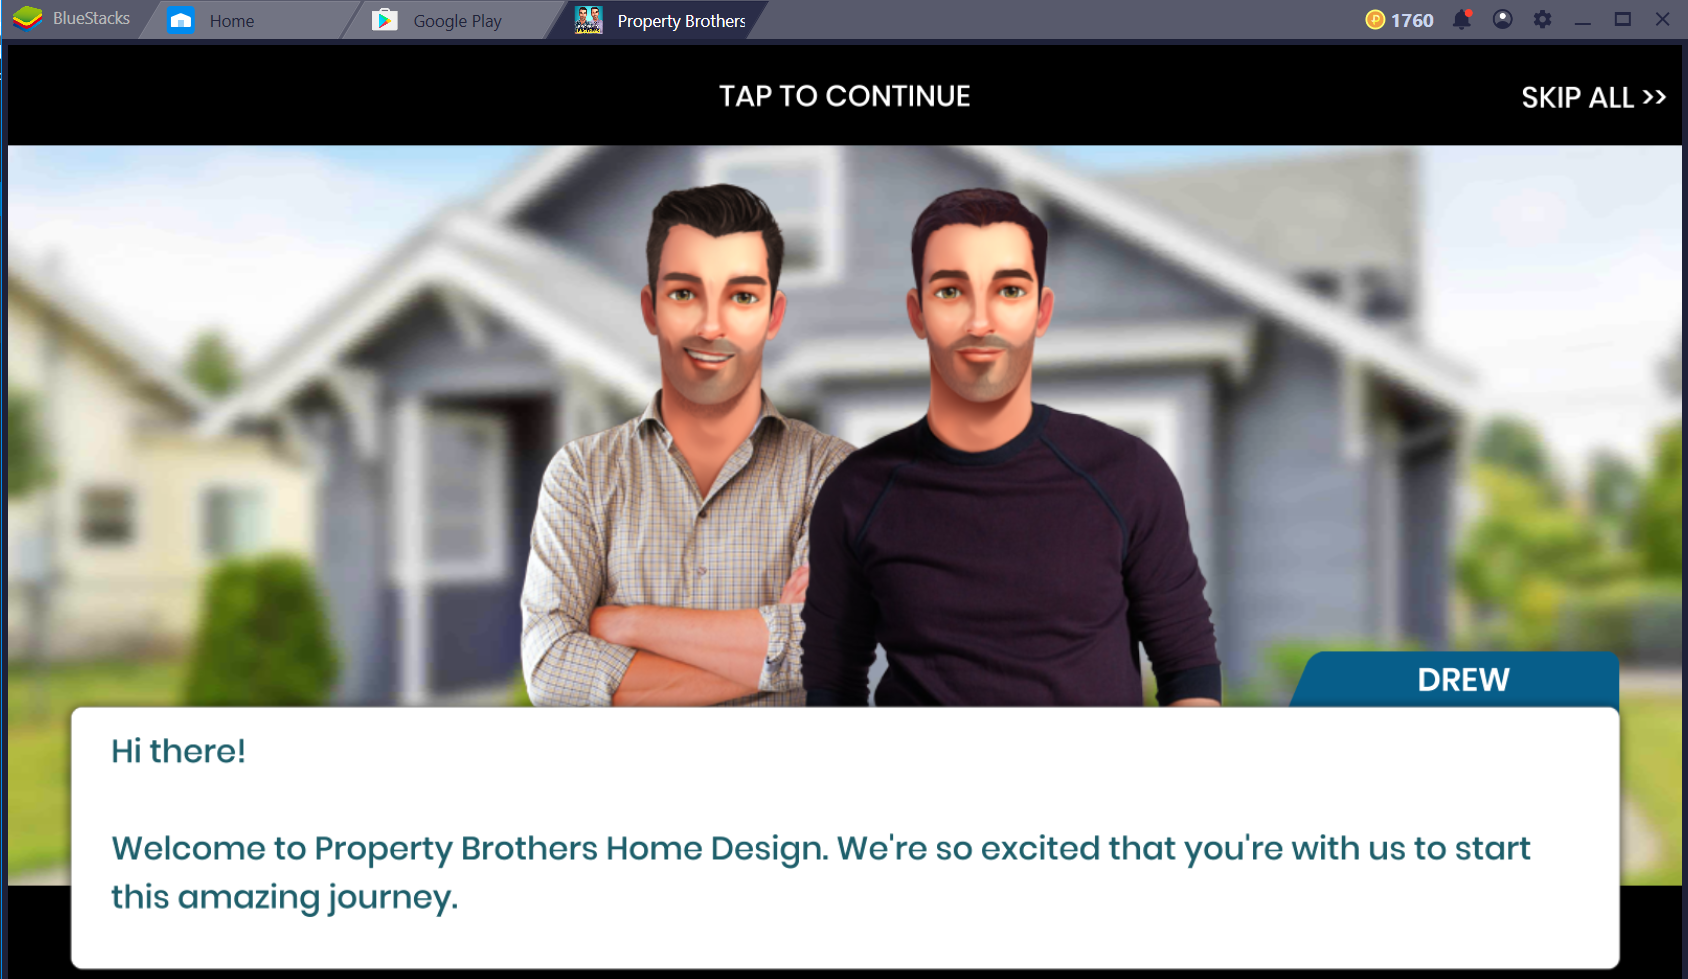 Property Brothers Home Design for PC